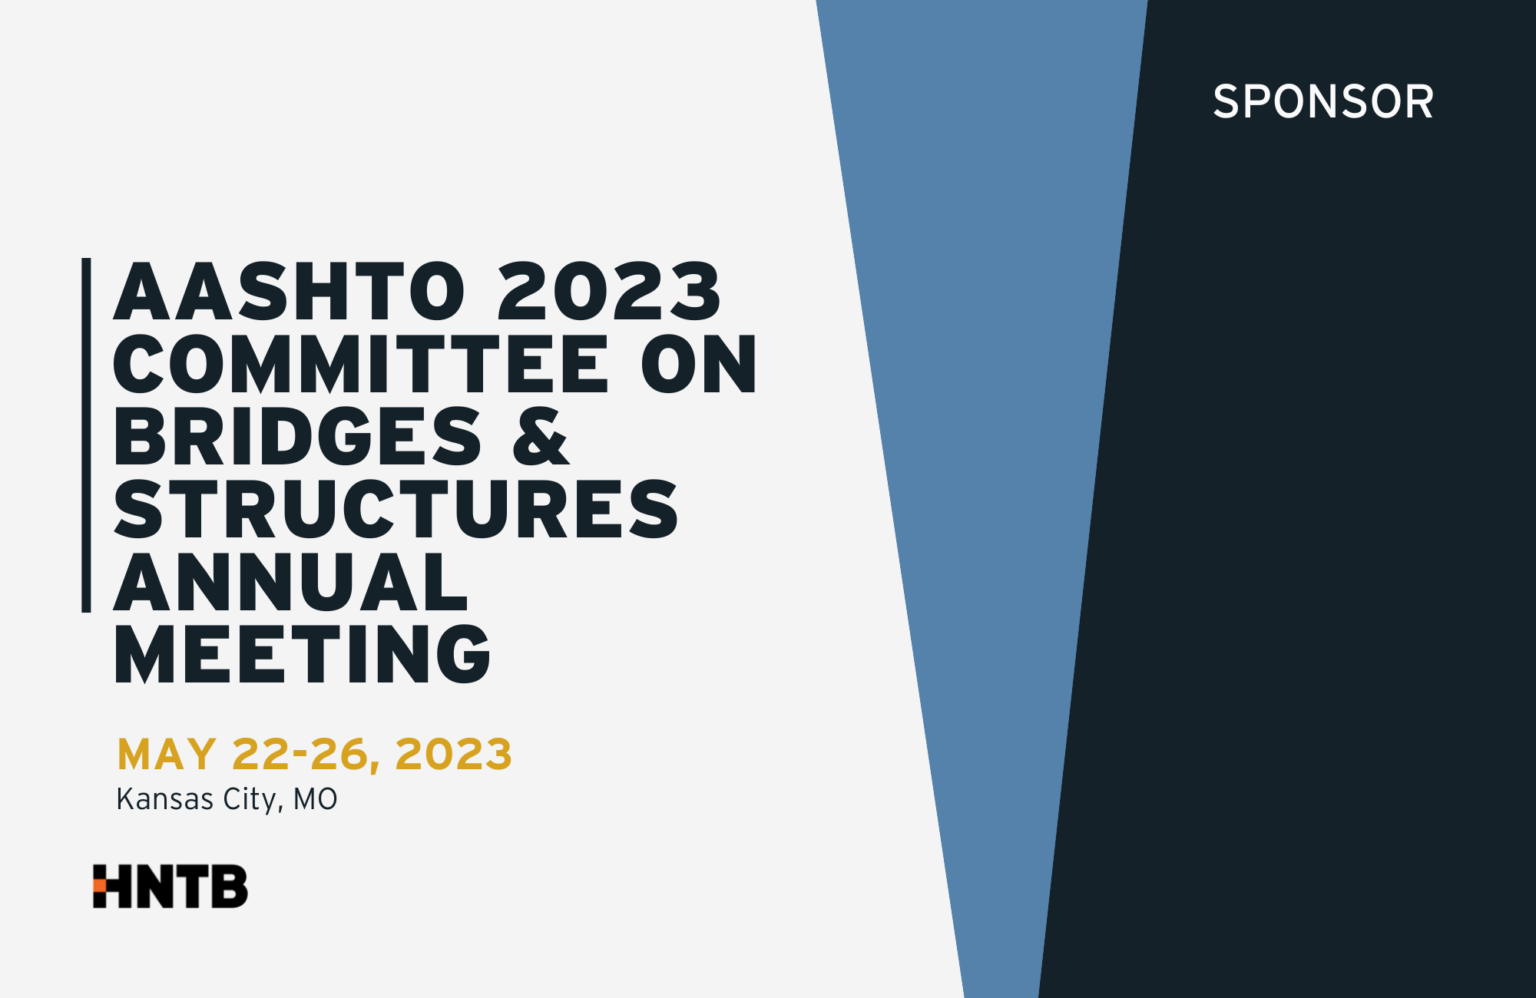 AASHTO 2023 Committee on Bridges & Structures Annual Meeting HNTB